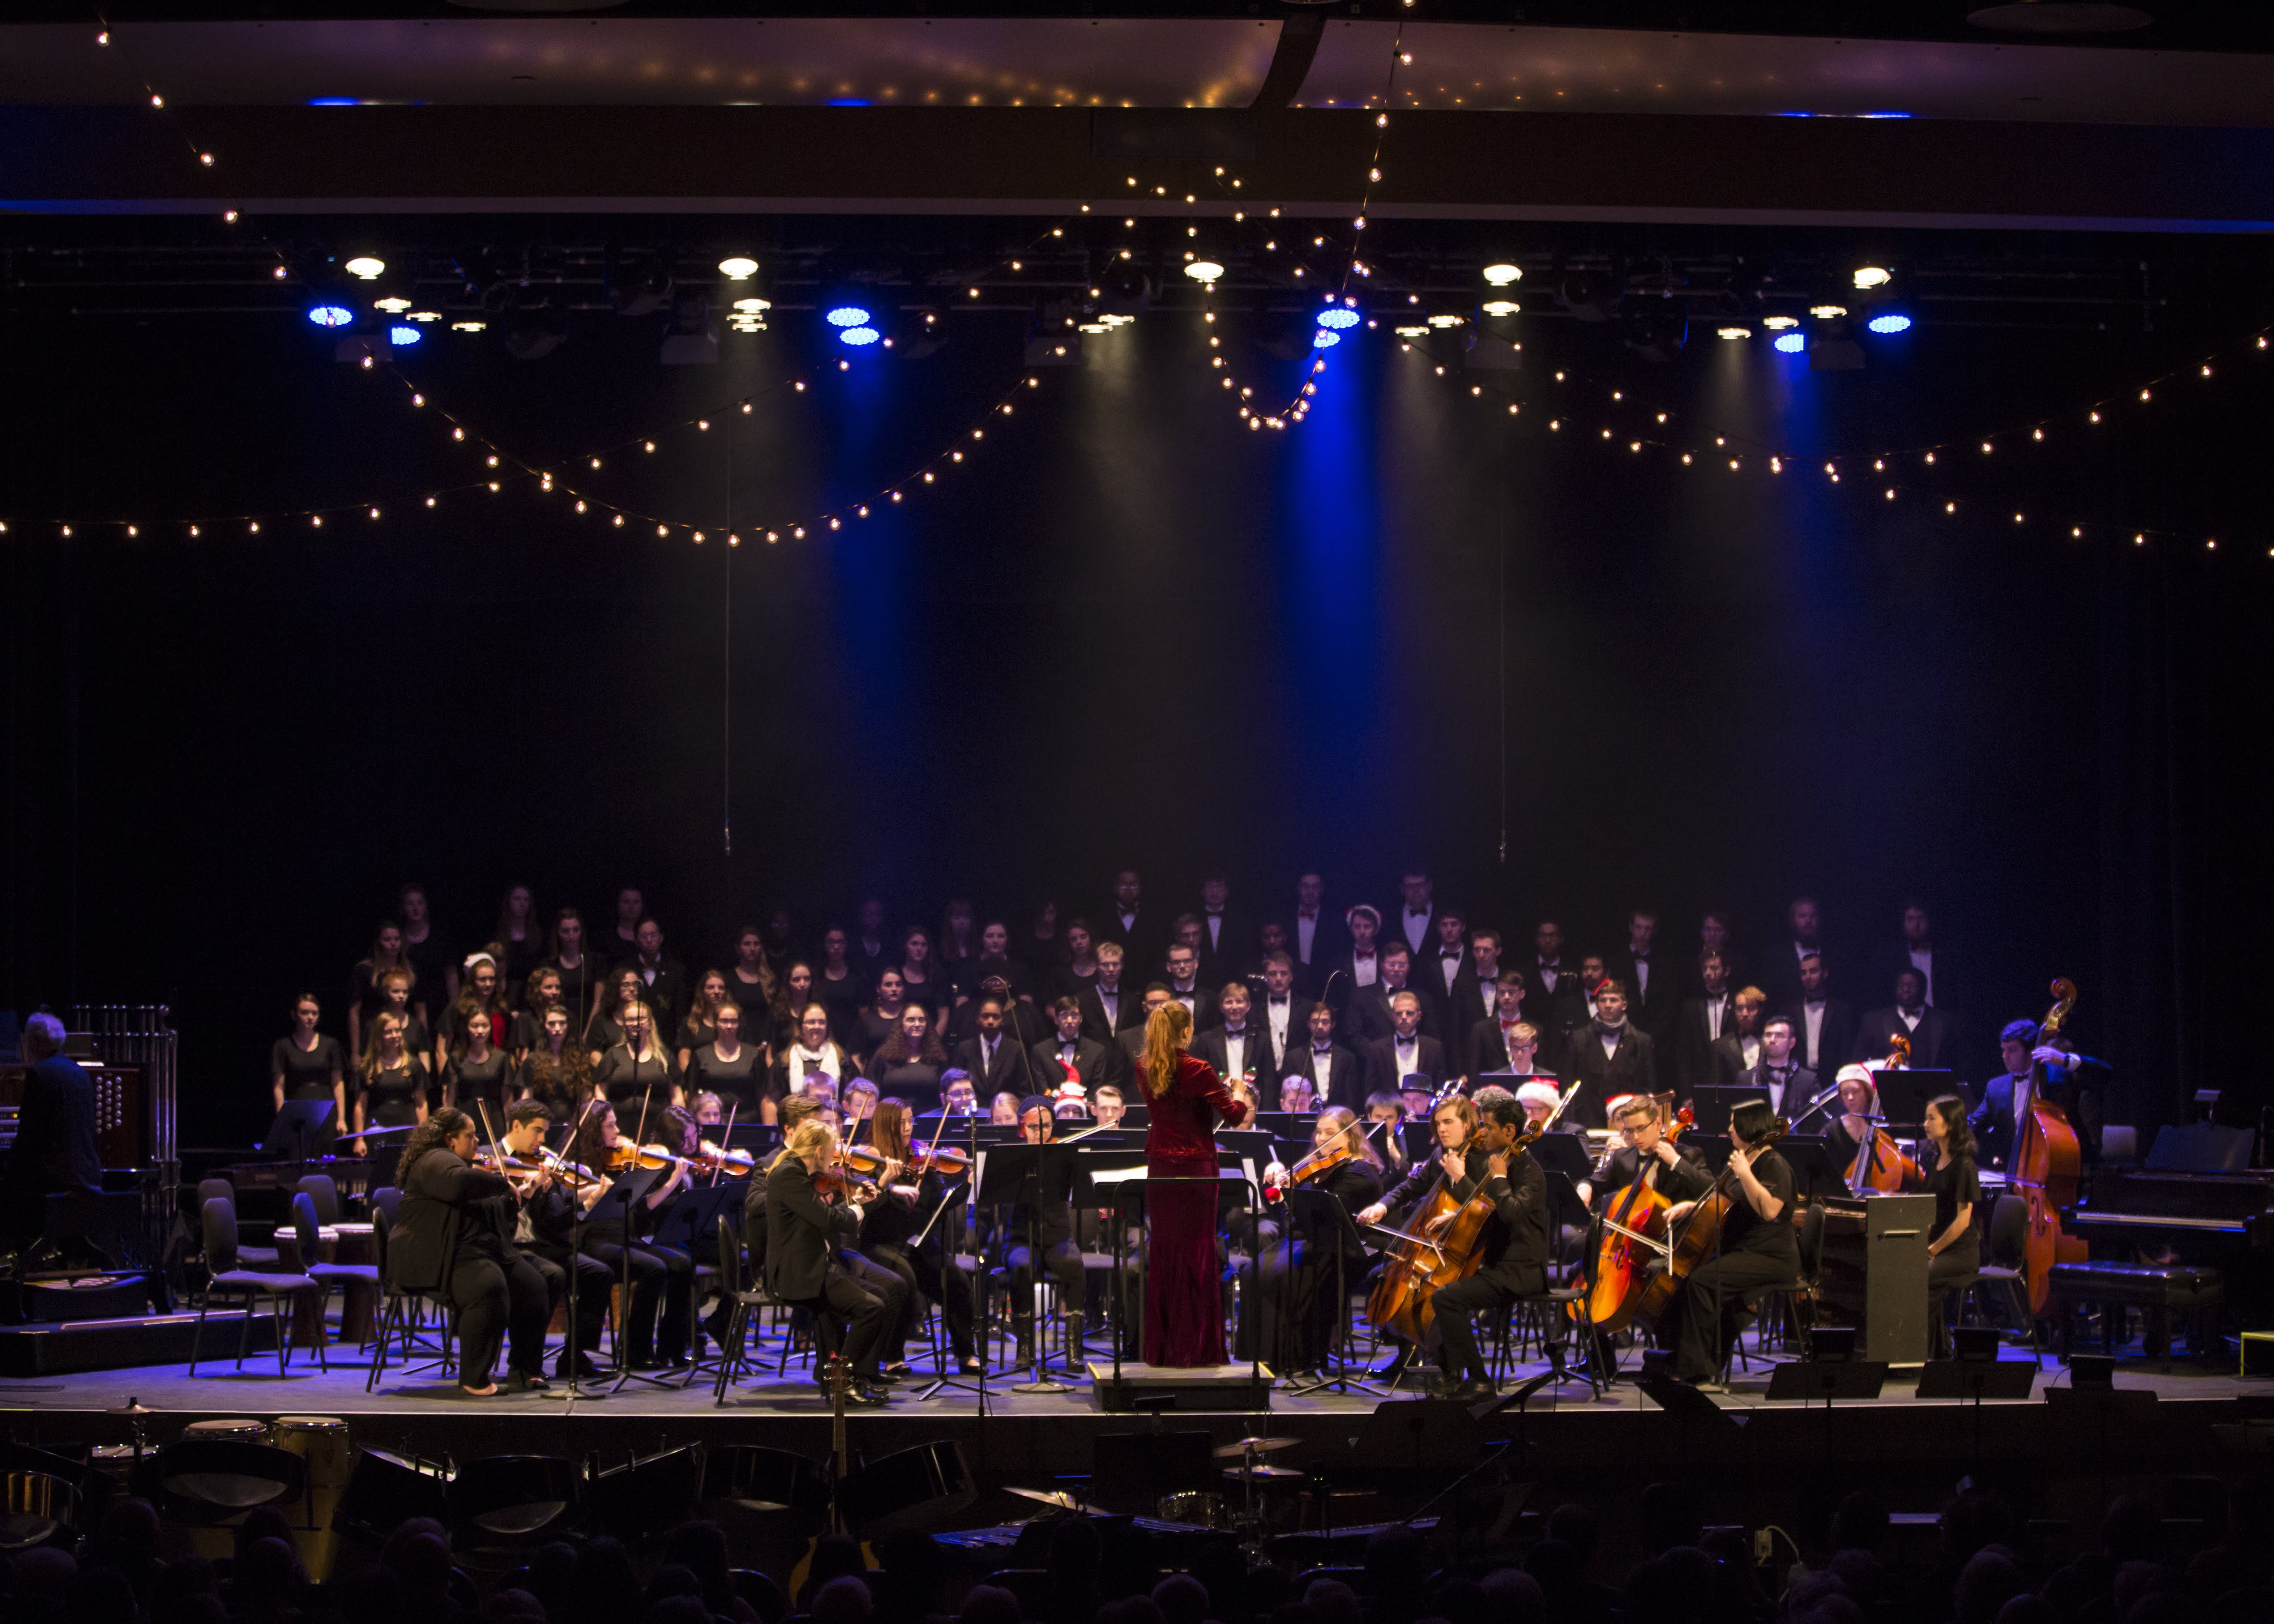 Tell School of Music Orchestra Performing at the 2017 Glorious Sounds of the Season Concert